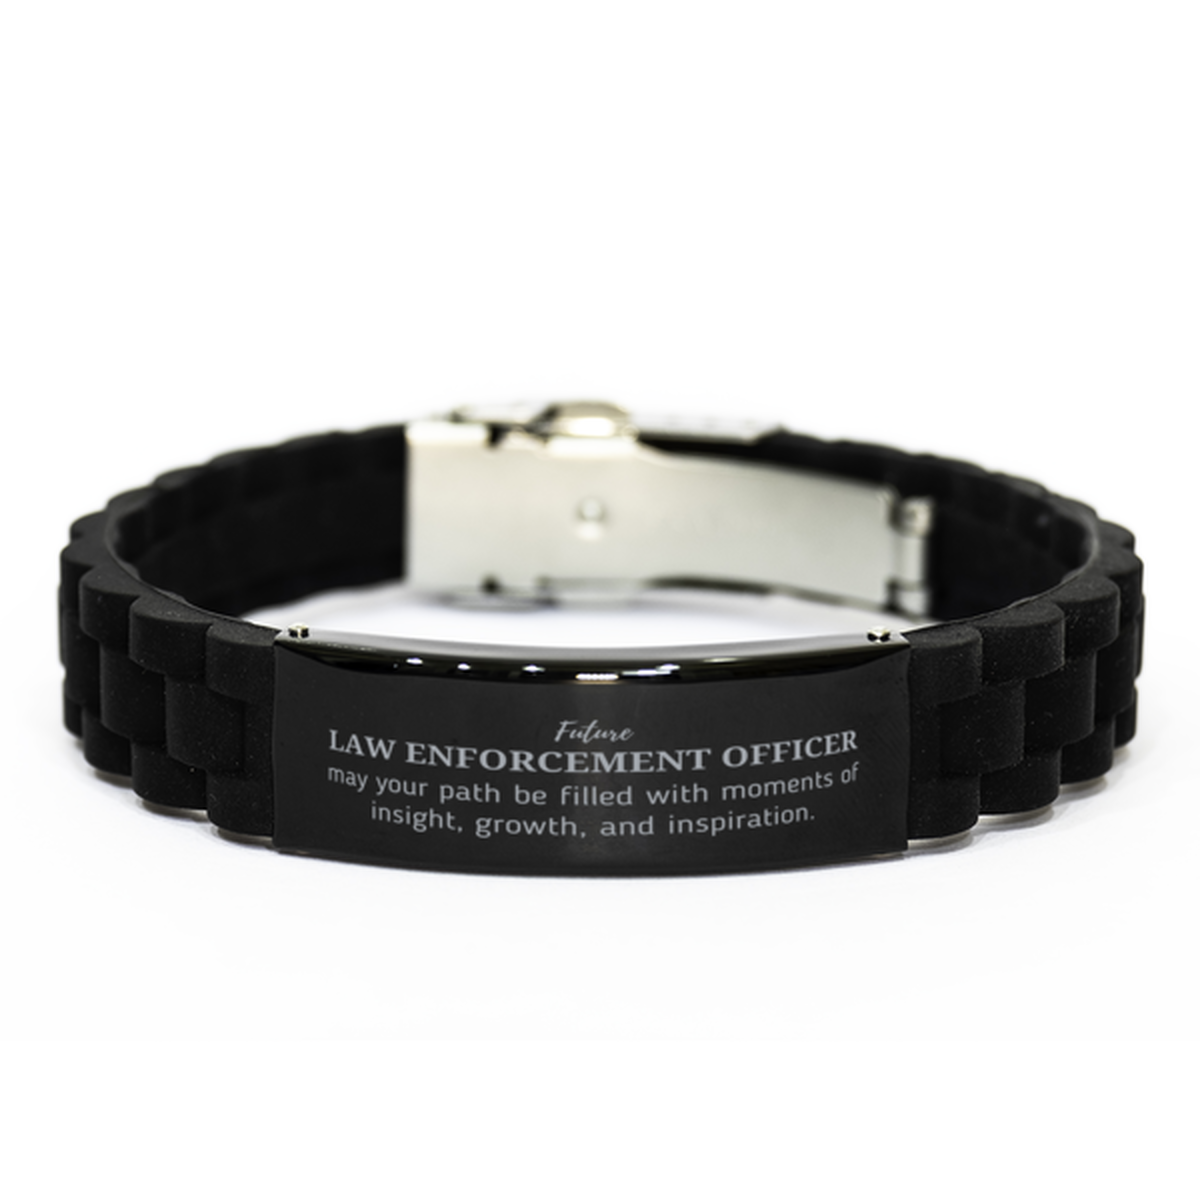 Future Law Enforcement Officer Gifts, May your path be filled with moments of insight, Graduation Gifts for New Law Enforcement Officer, Christmas Unique Black Glidelock Clasp Bracelet For Men, Women, Friends